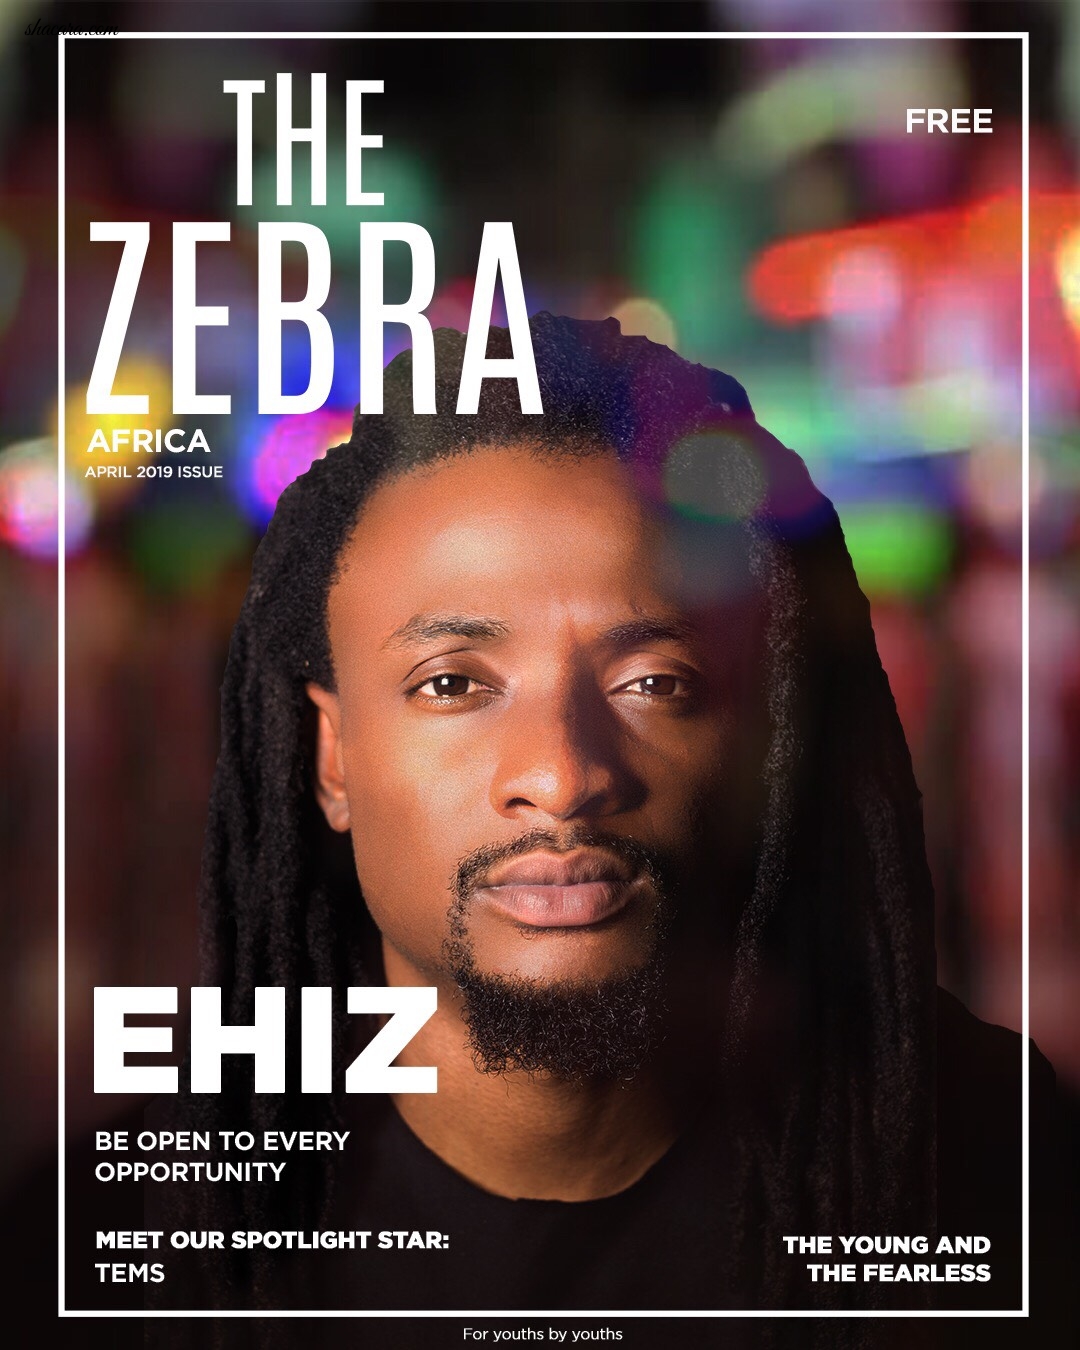 Ehiz Shares His Success Story To Inspire Nigerian Youths In Zebra Magazine’s April Issue